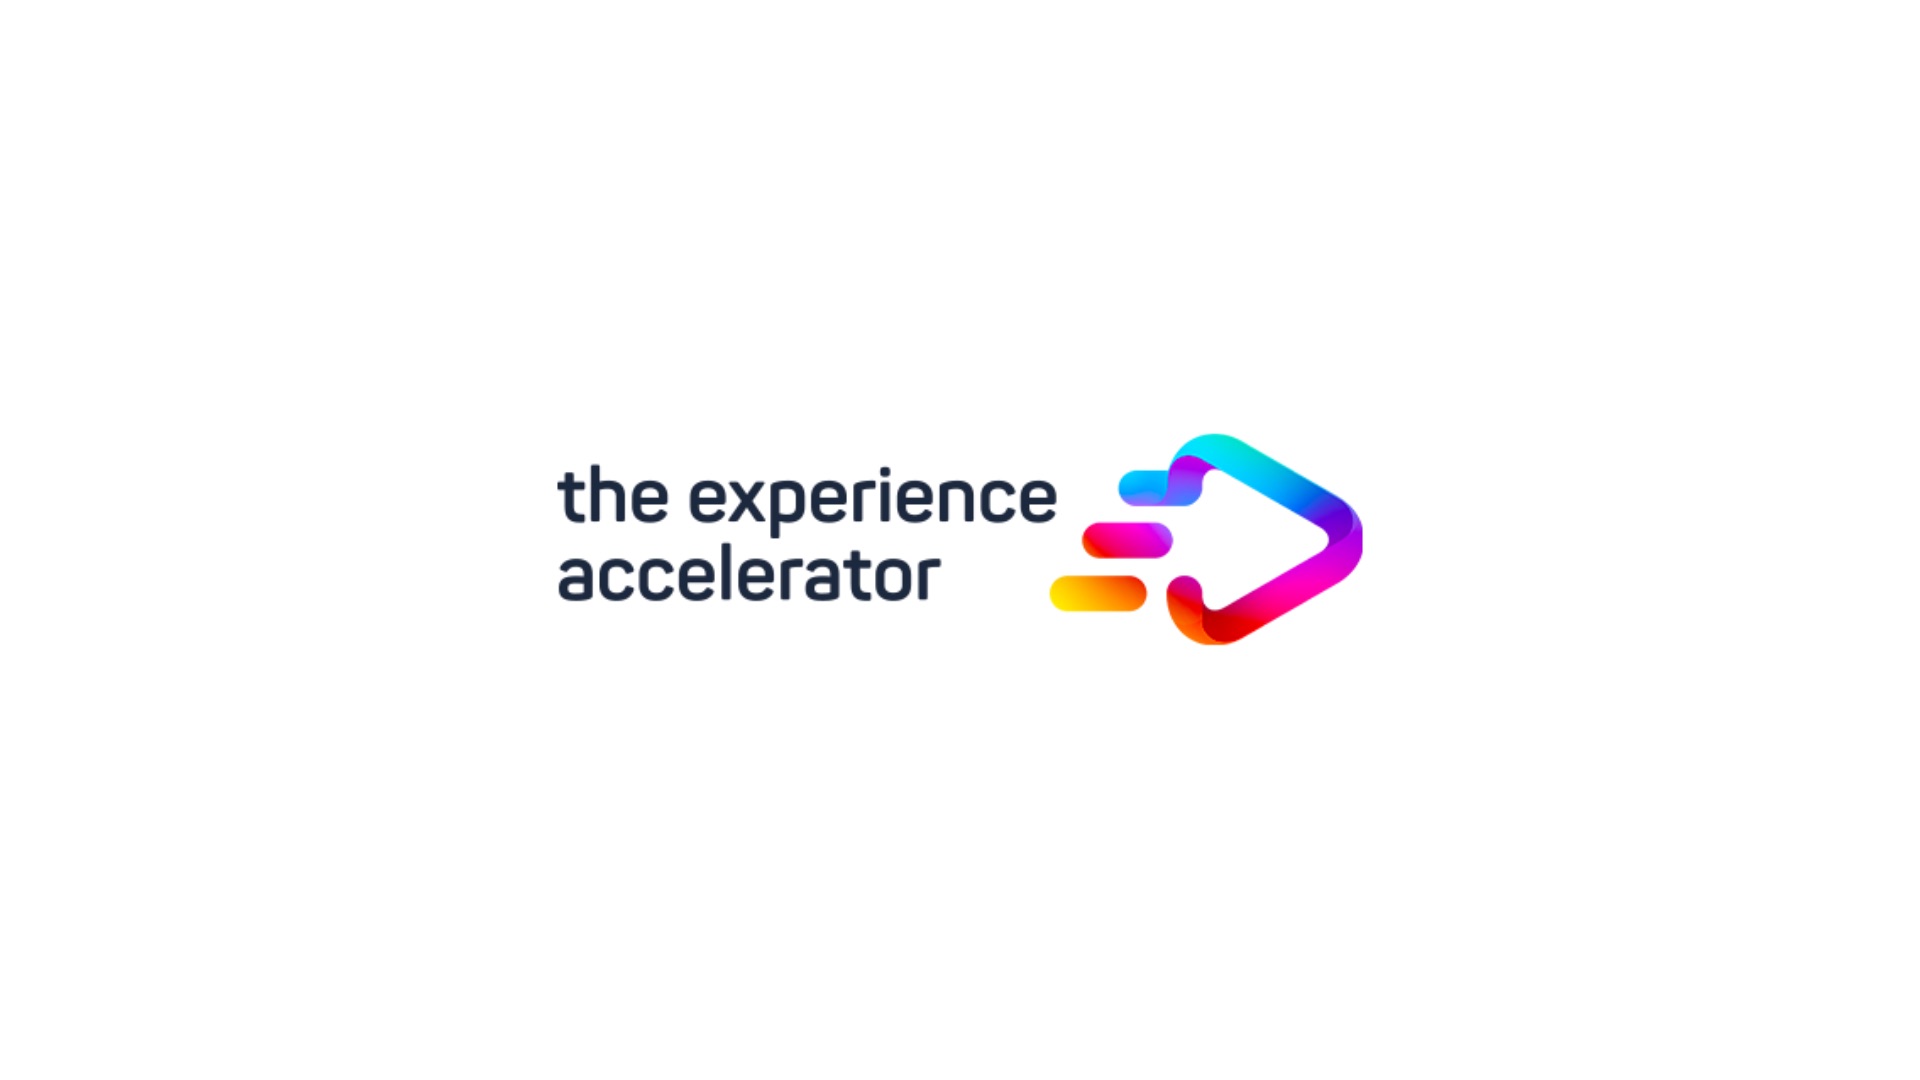 The Experience Accelerator